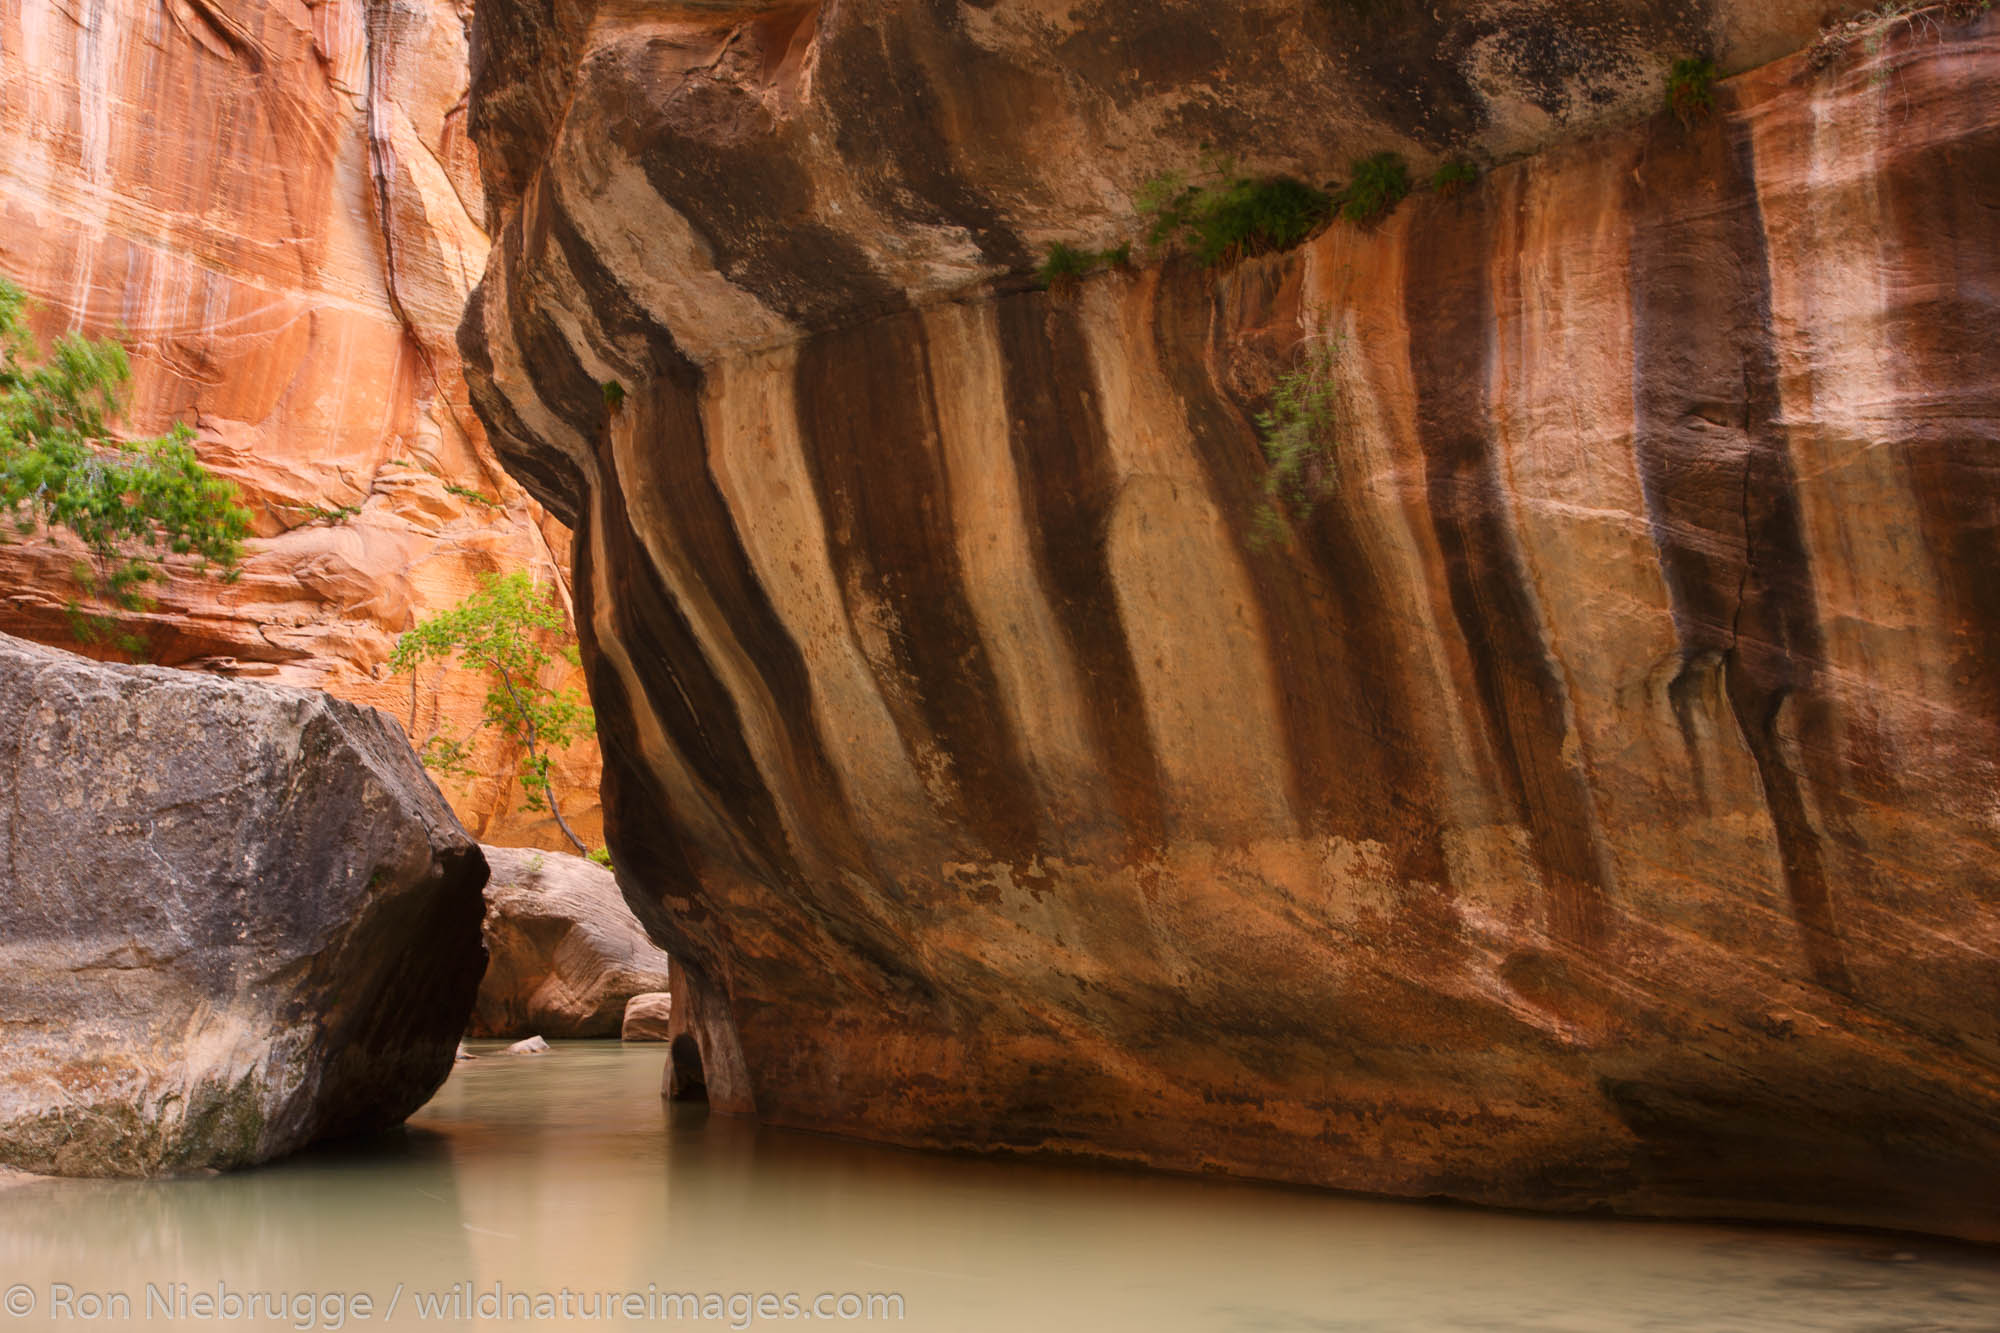 The Narrows on the Virgin River, Zion National Park, Utah.